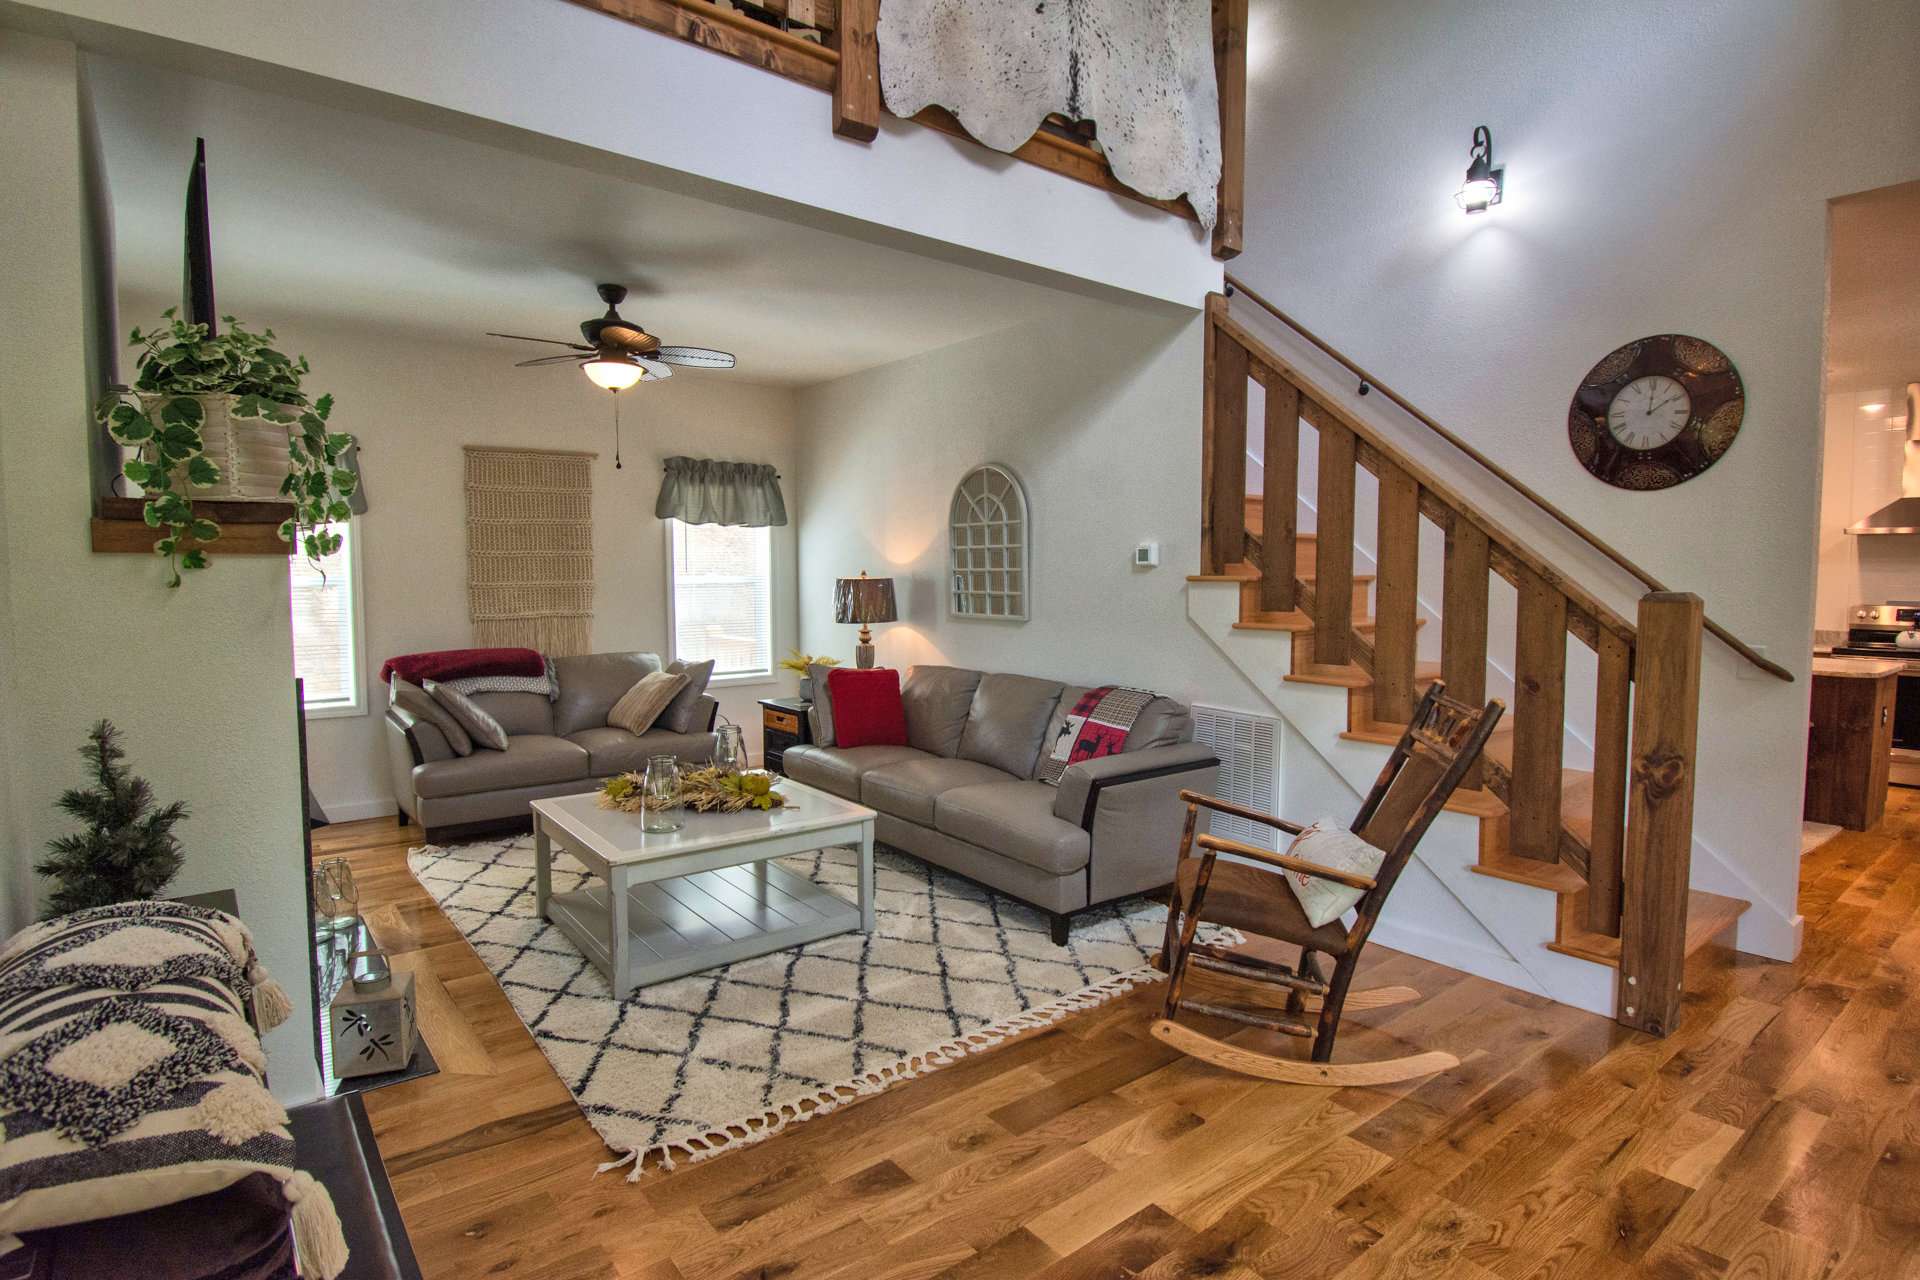 The main level offers the living room with vaulted ceiling, gas fireplace framed in granite, and an open kitchen, dining area including a center island with bar seating  in the kitchen and access to back deck from the dining area.